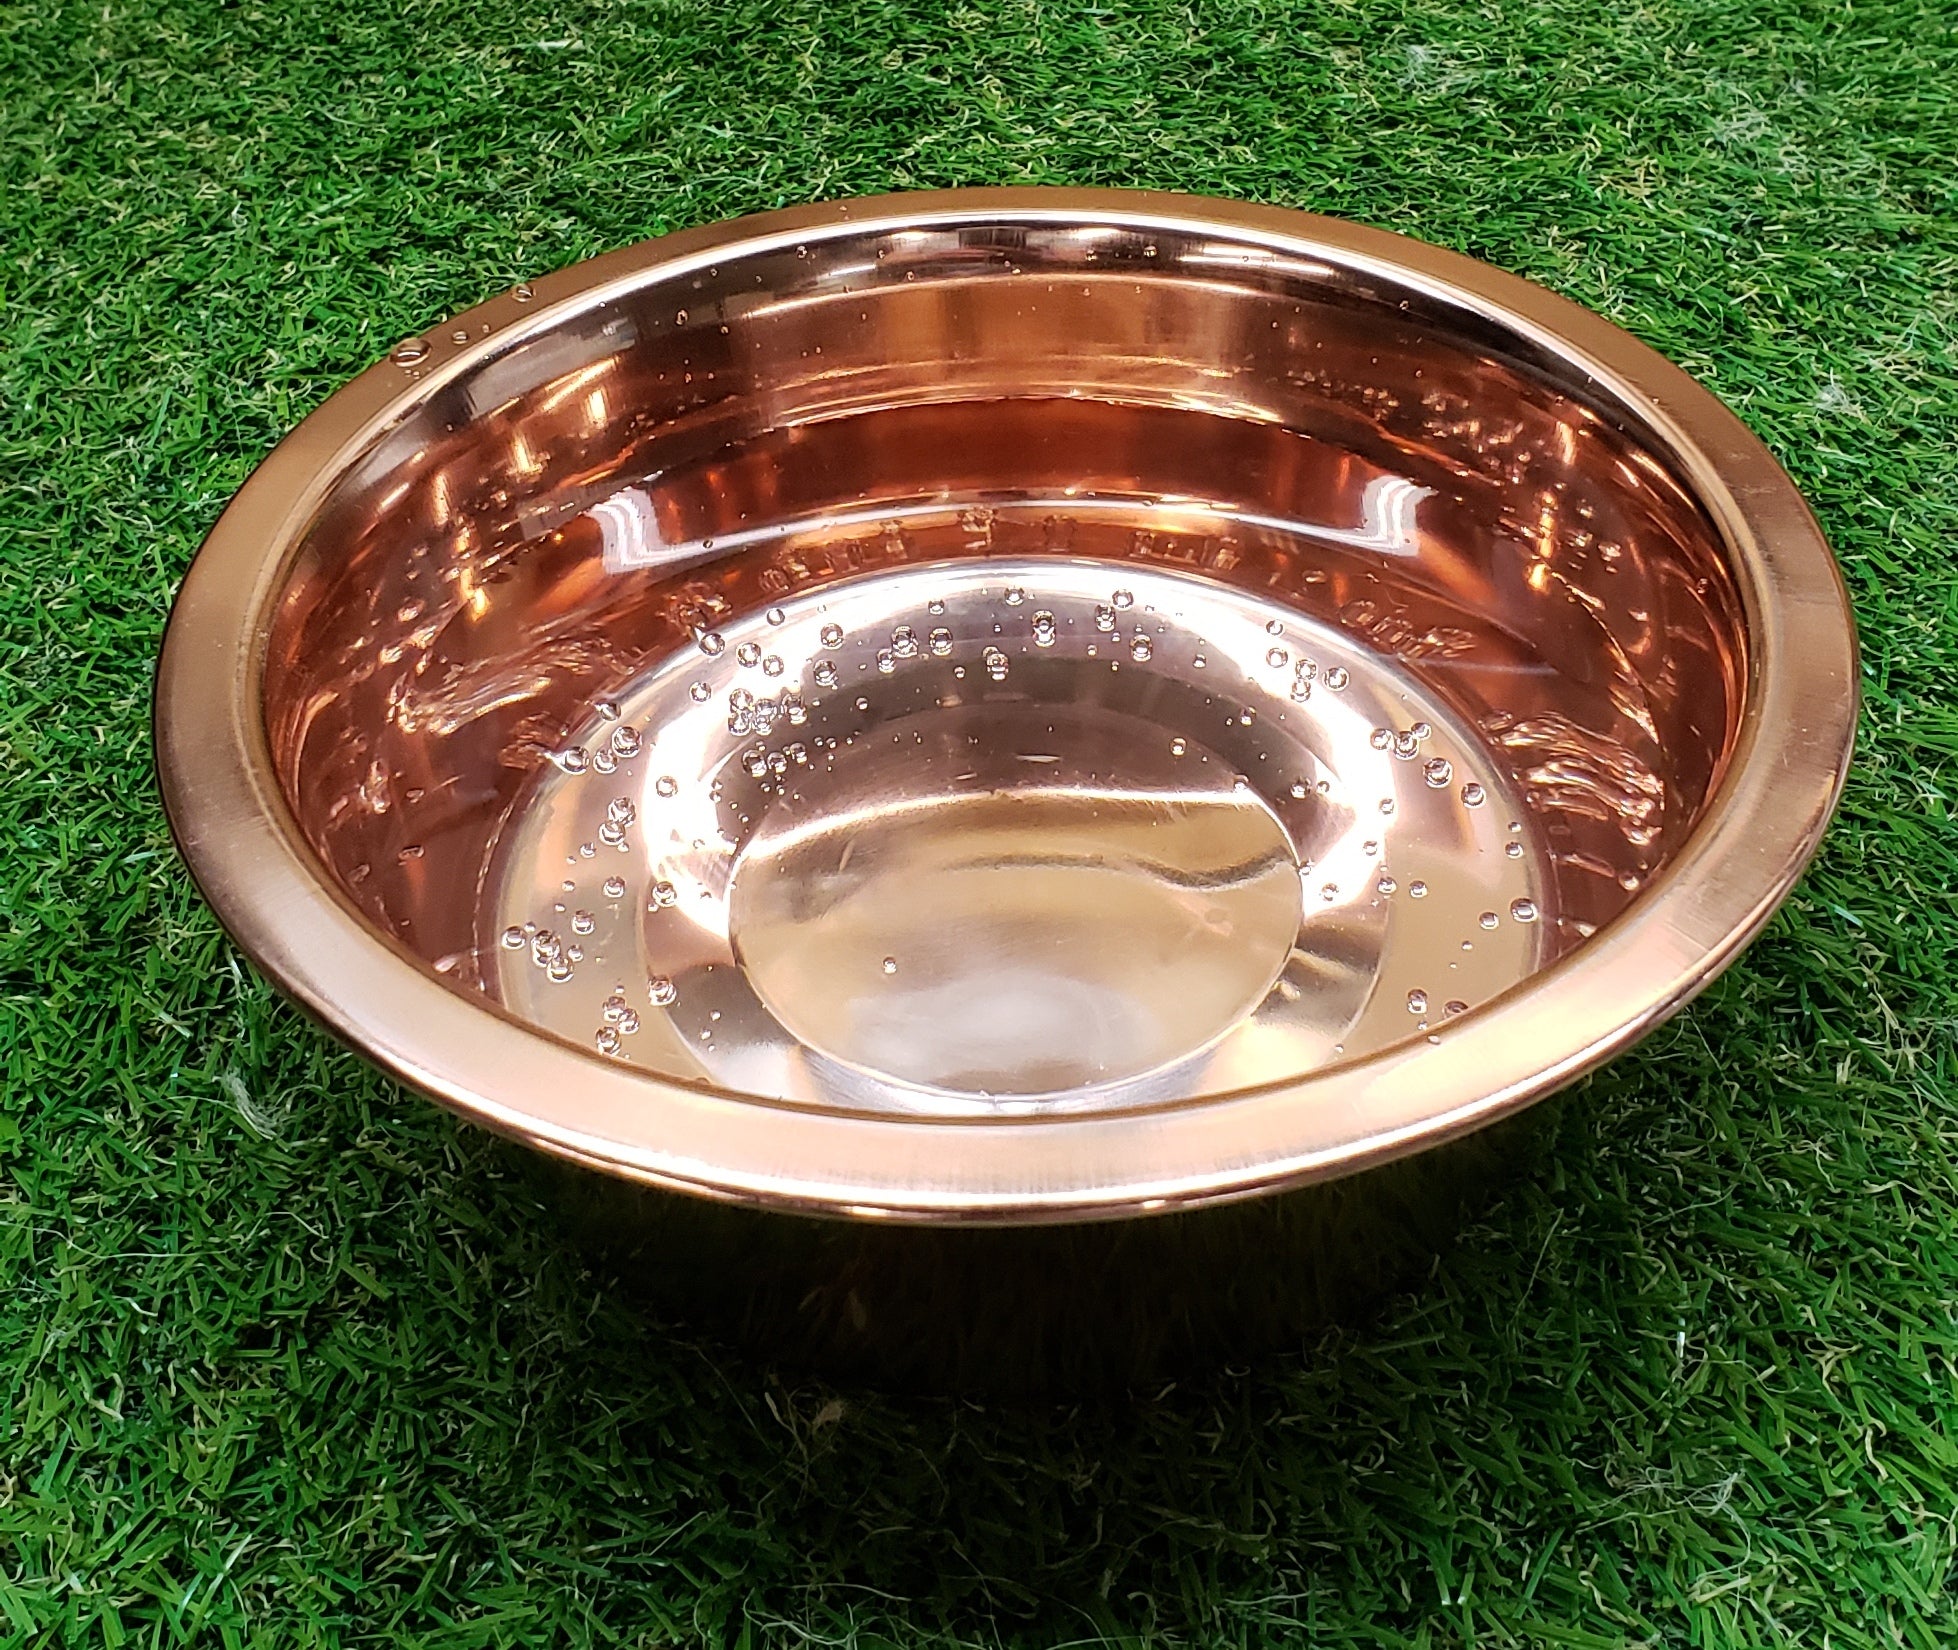 Silver Plated - No Tip (Food or Water) - CuBowl